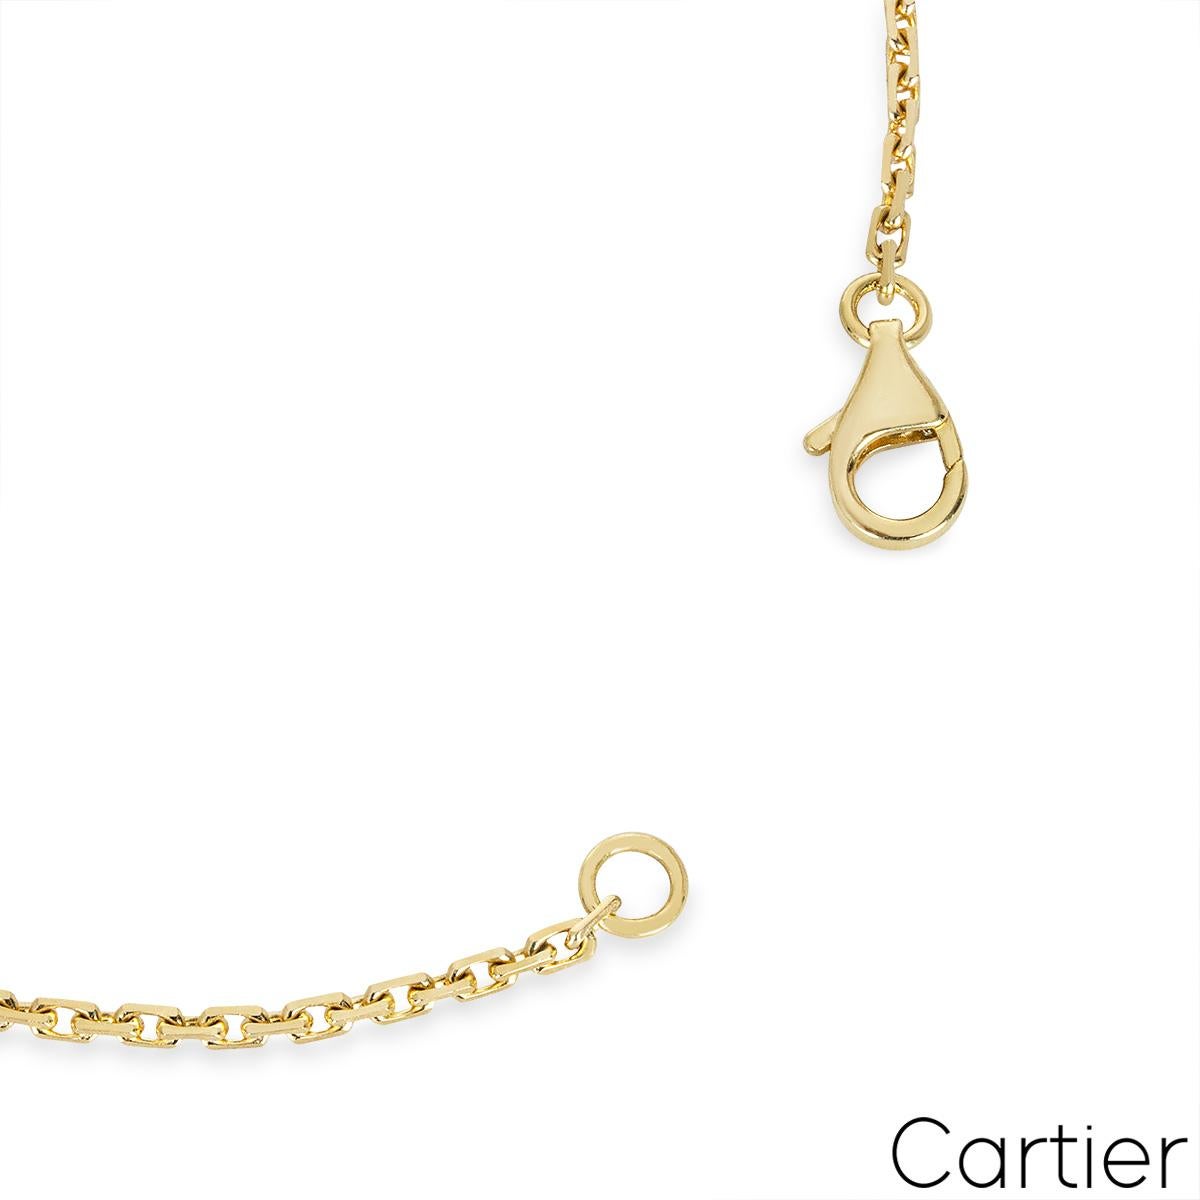 Cartier 18k Yellow Gold Diamond Love Necklace B7013800 In Excellent Condition For Sale In London, GB